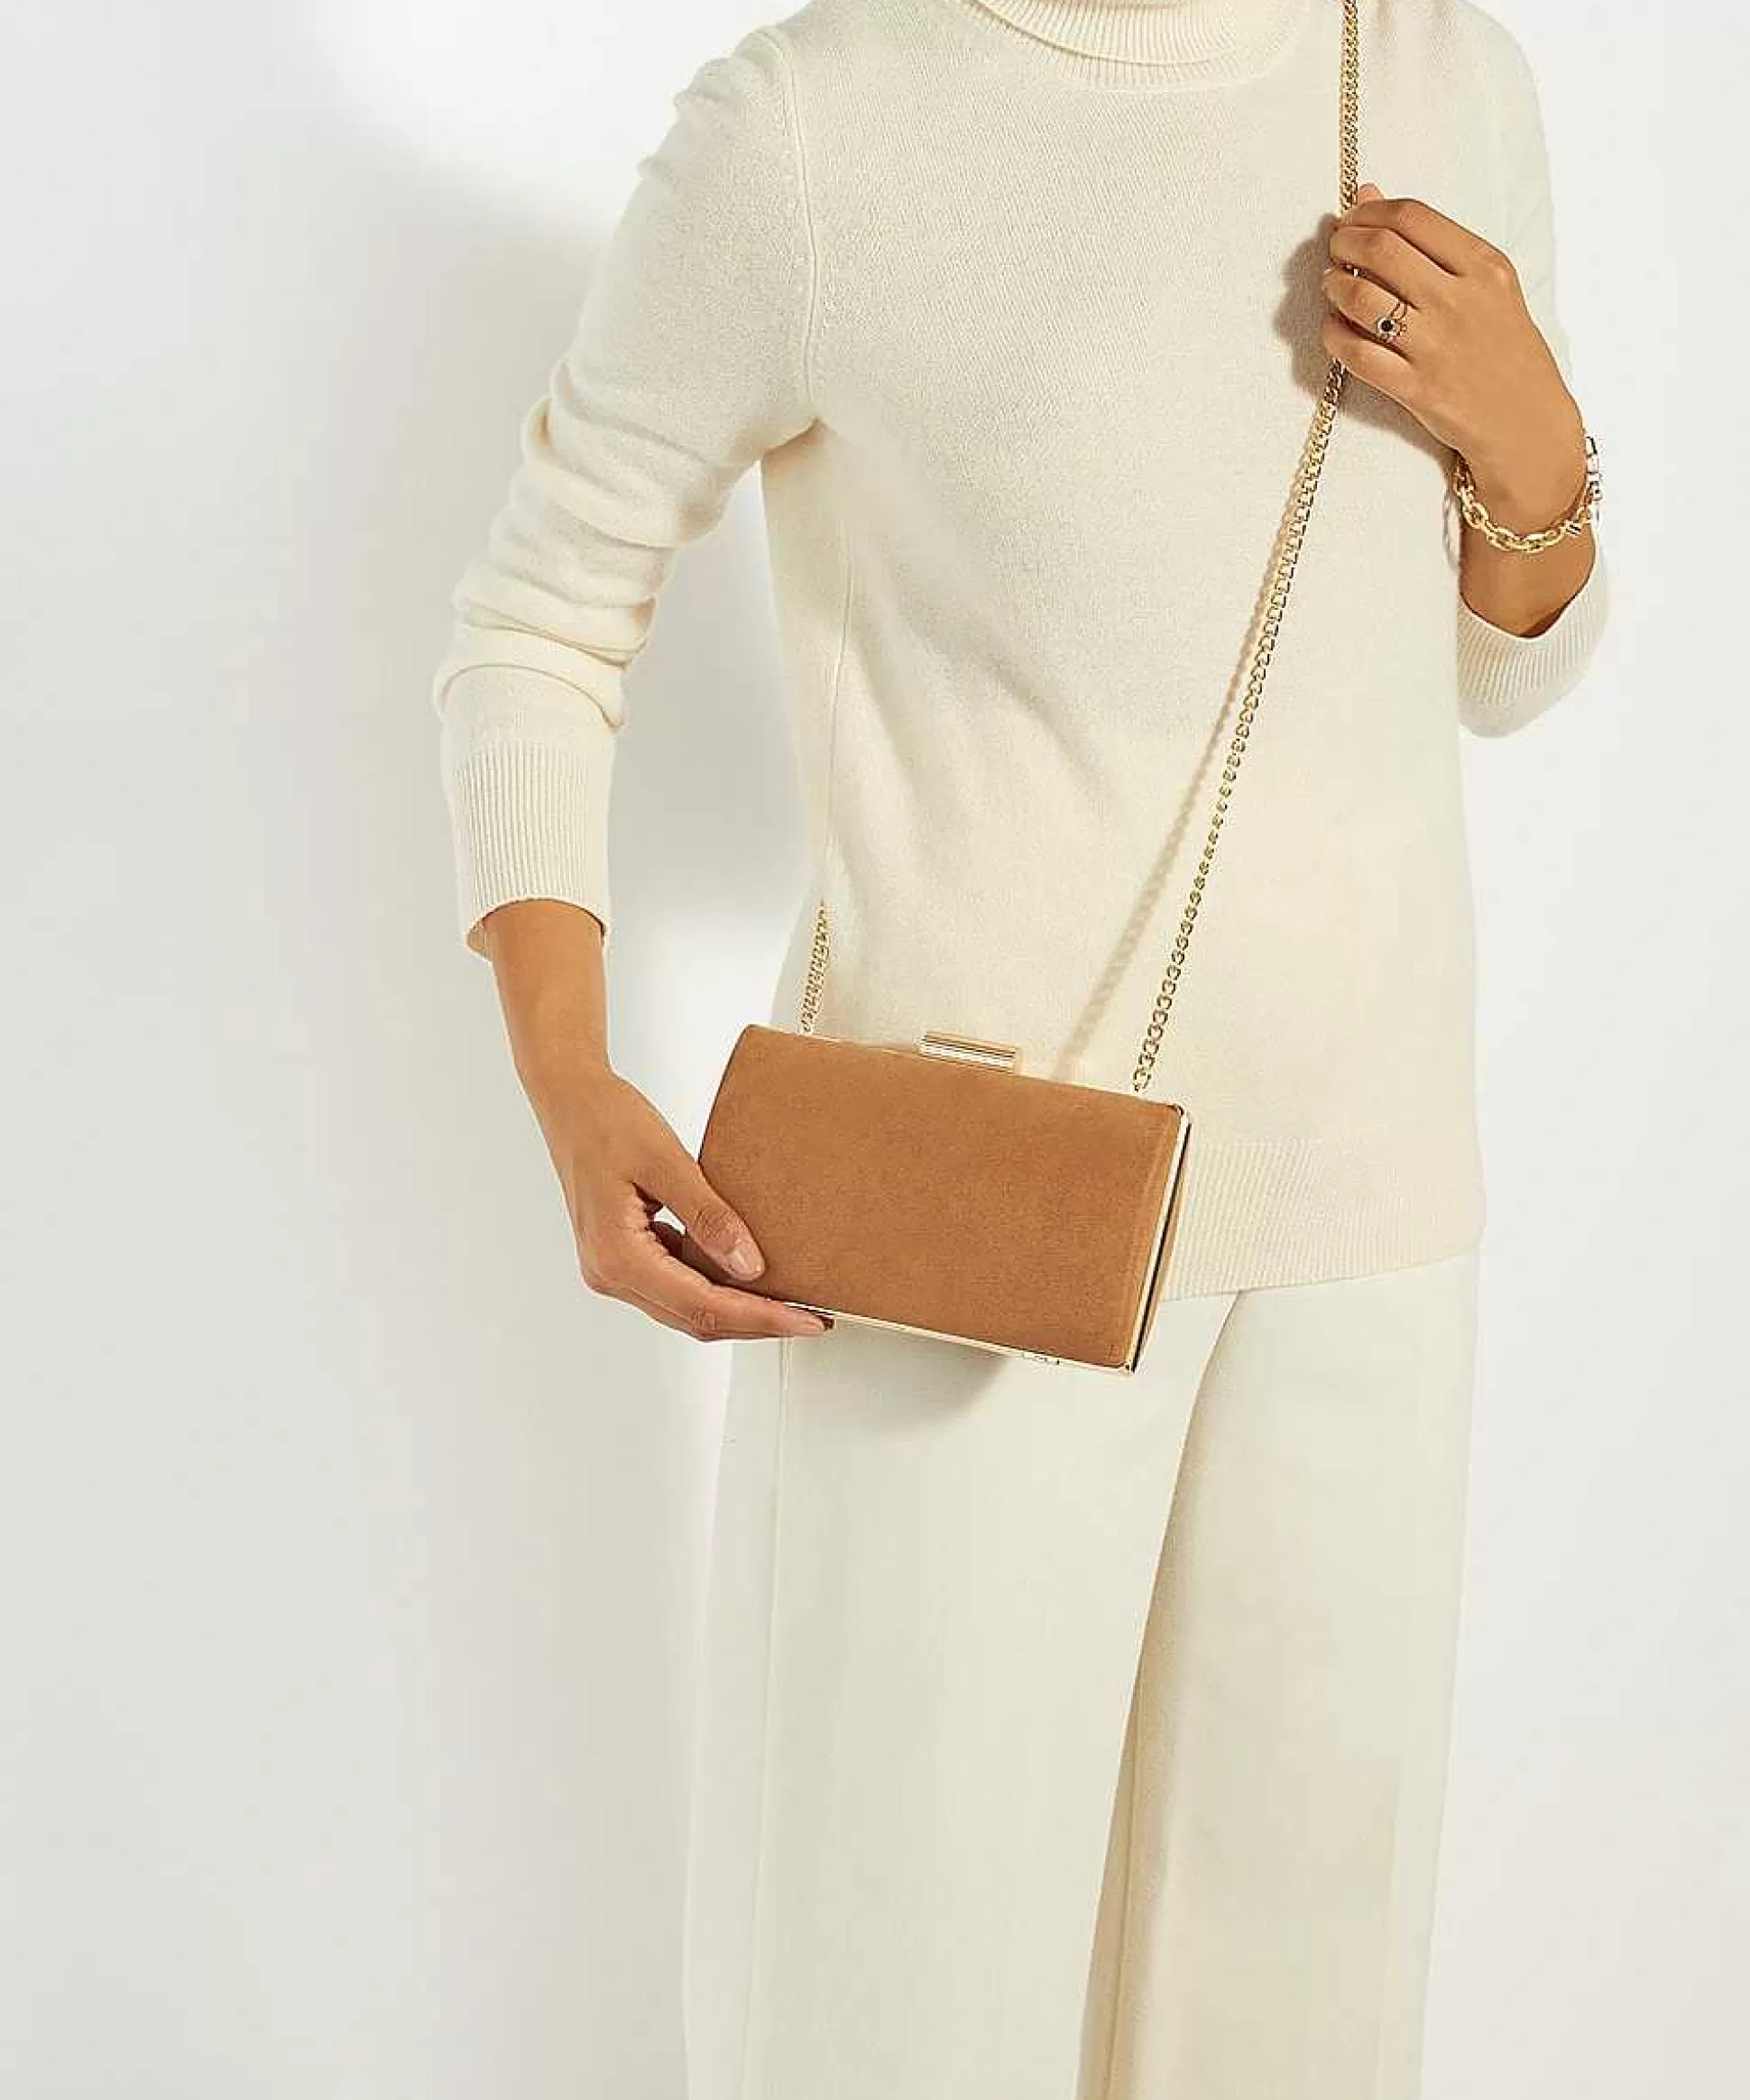 Dune London BELLEVIEW - CAMEL- Gifts | Clutch Bags